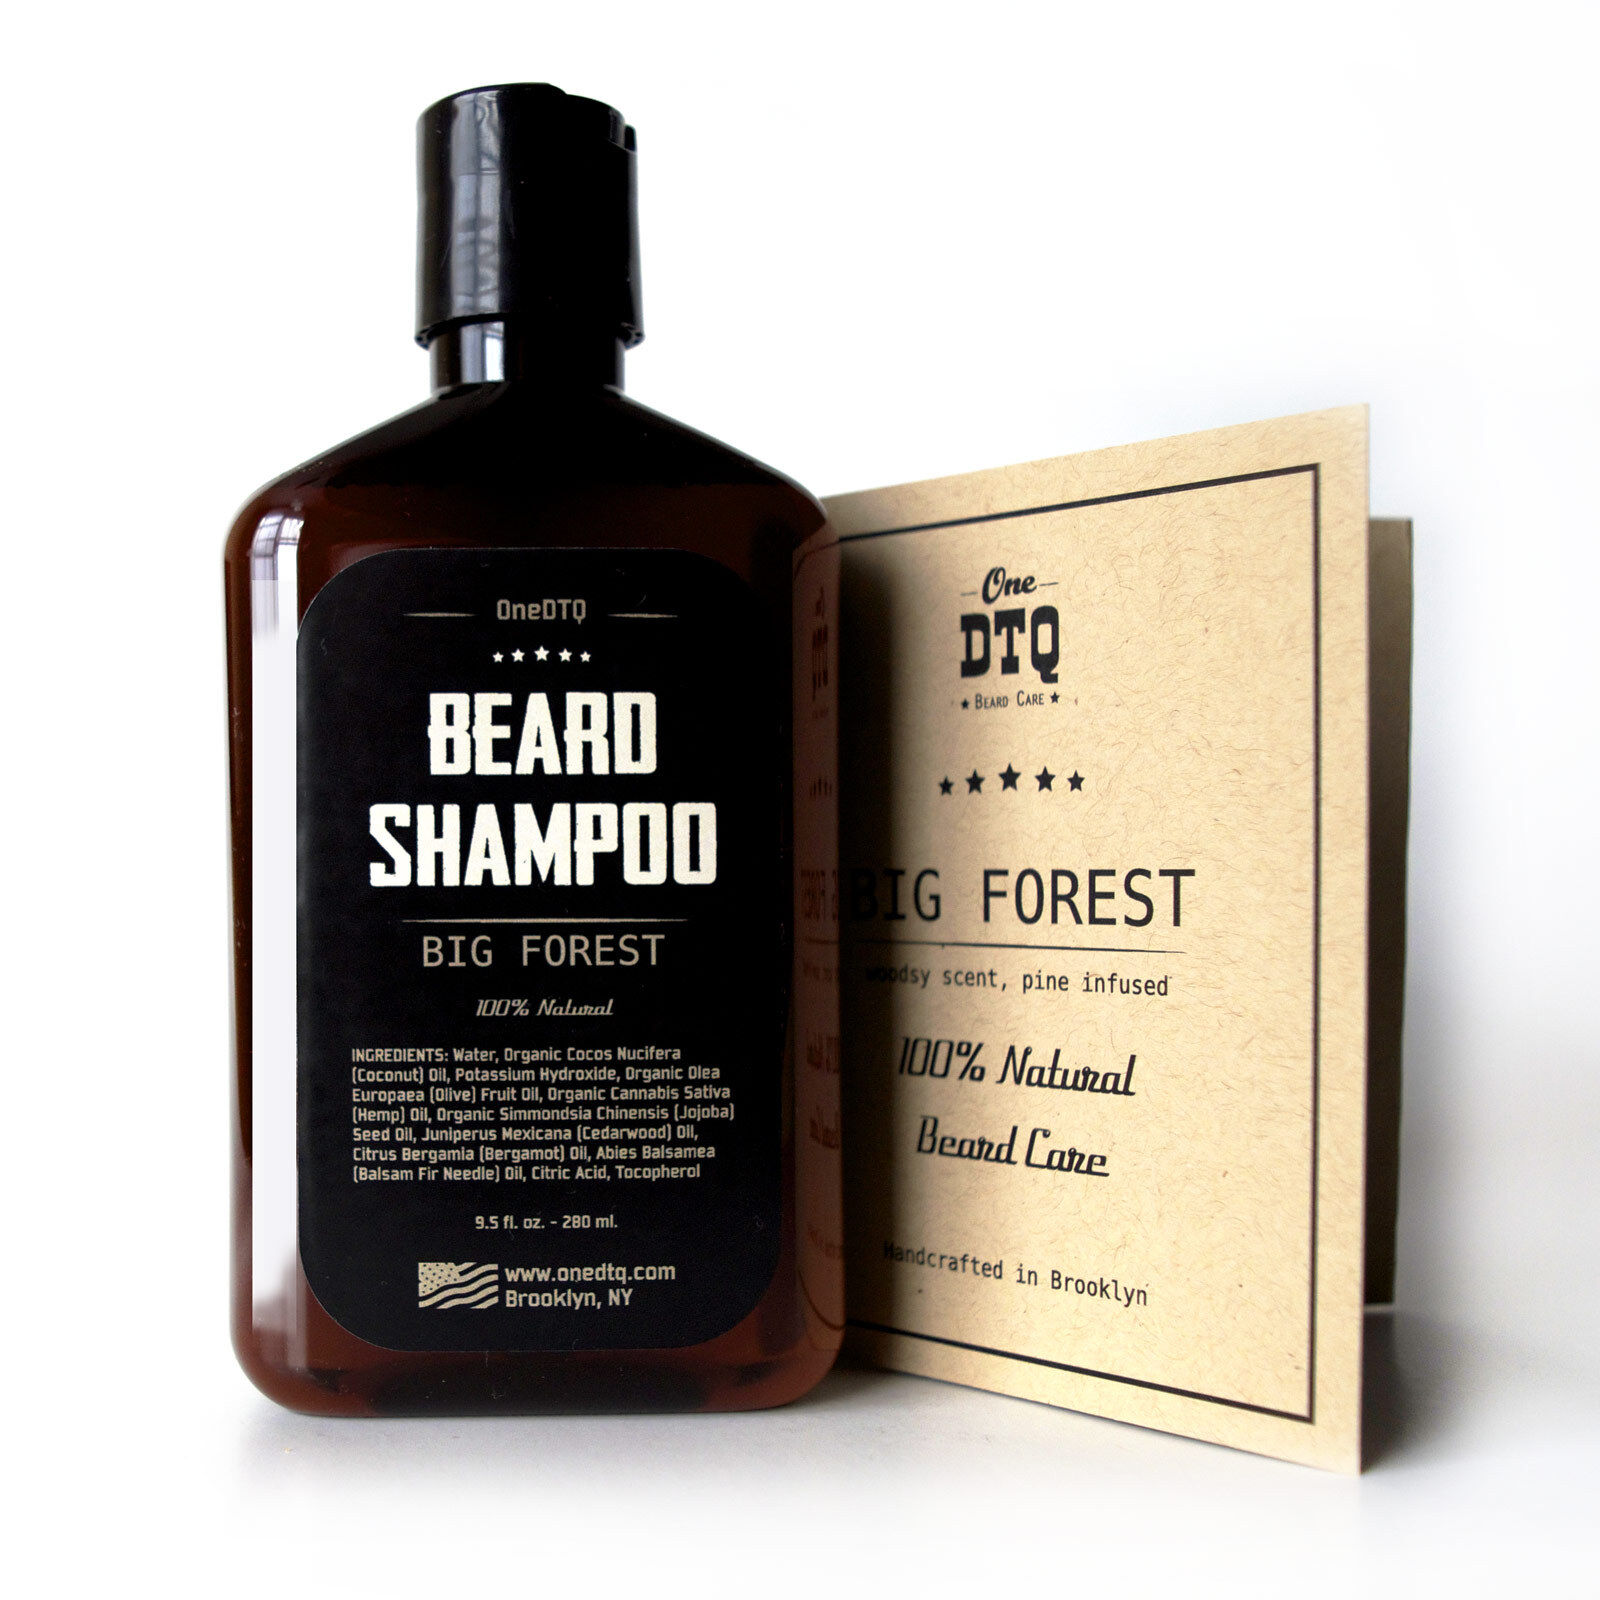 Big Forest Beard Shampoo - Thoroughly Cleans, Conditions & Promotes Beard Growth